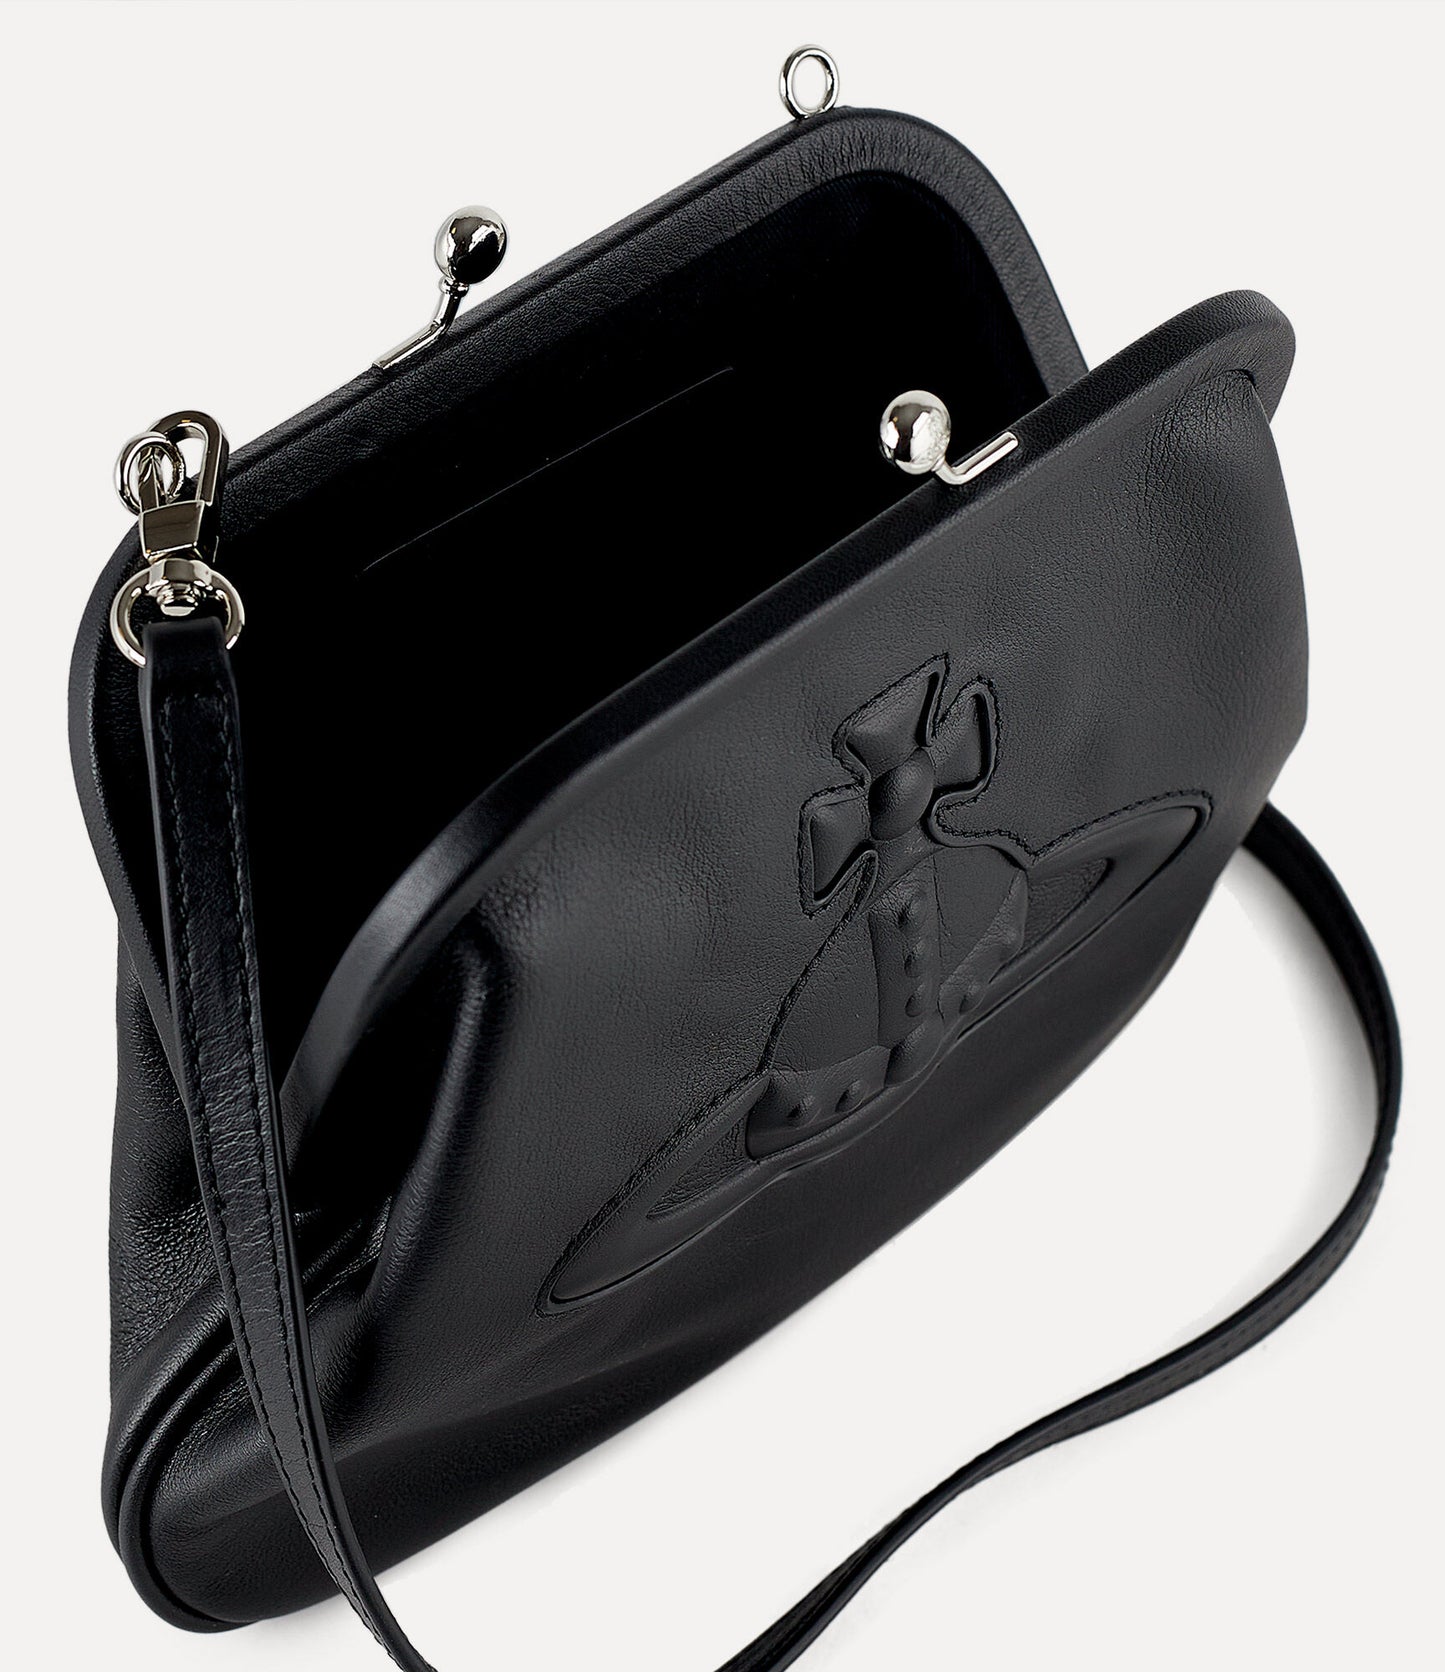 Vivienne Injected Orb leather clutch